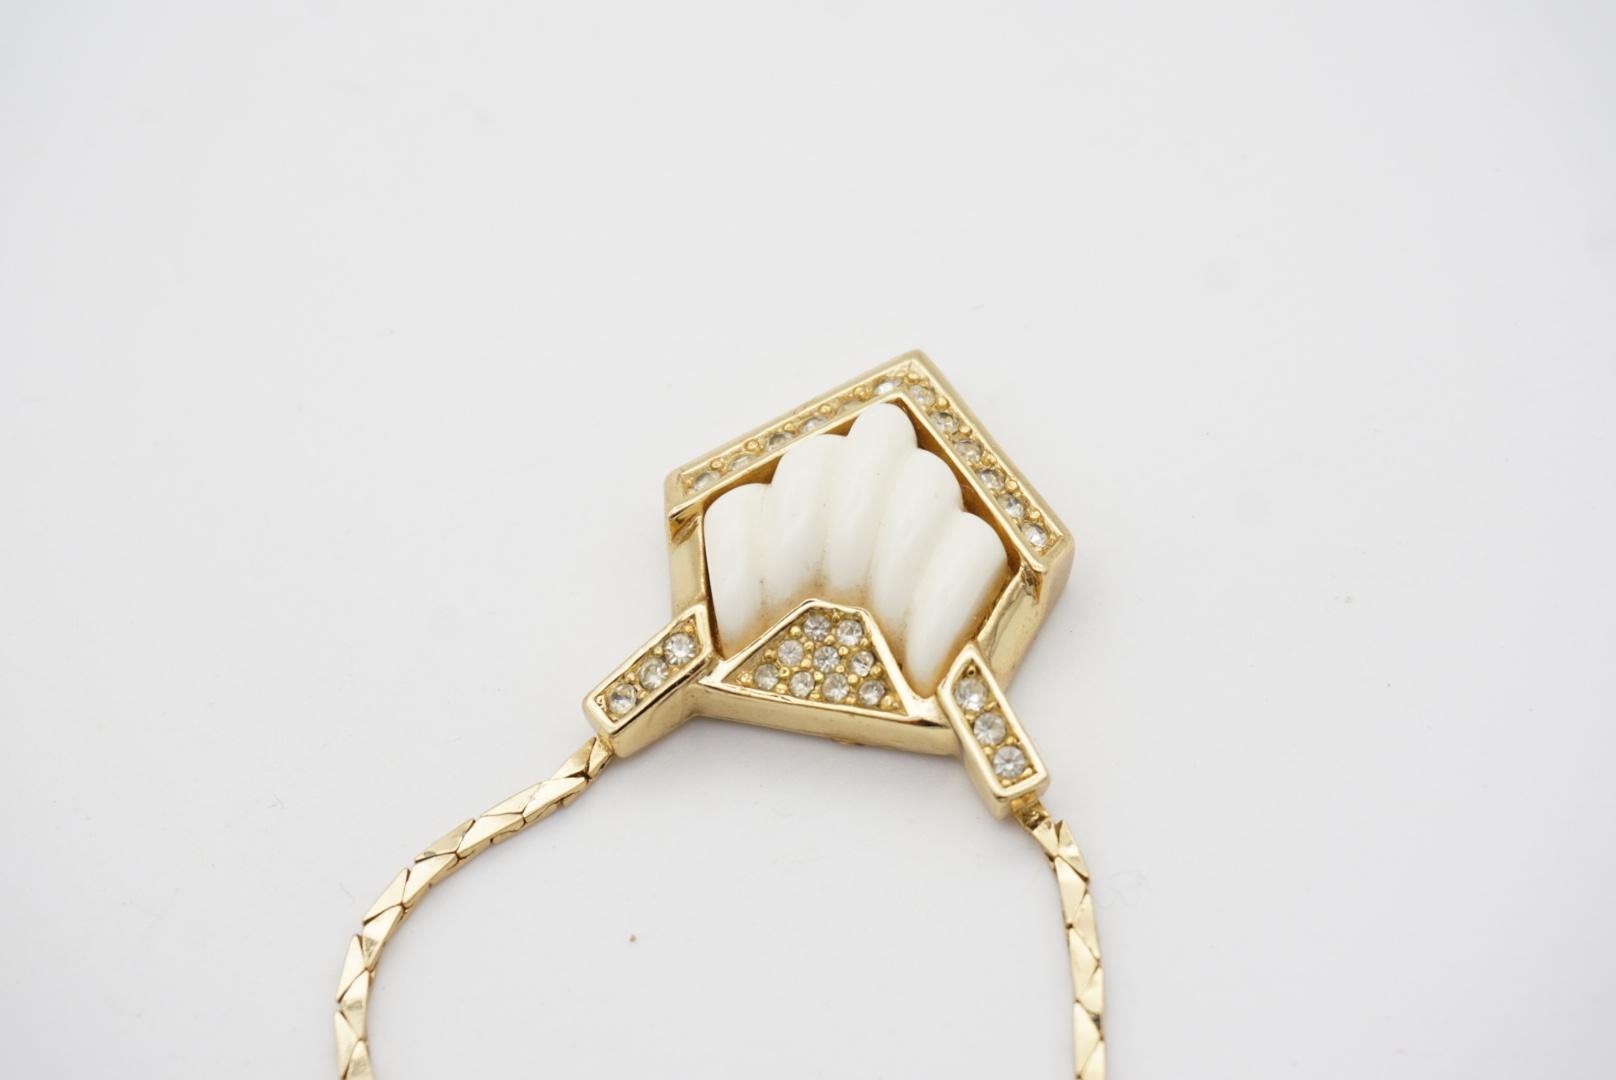 Christian Dior Vintage 1980s Triangle White Cream Crystal Gold Pendant Necklace For Sale 3